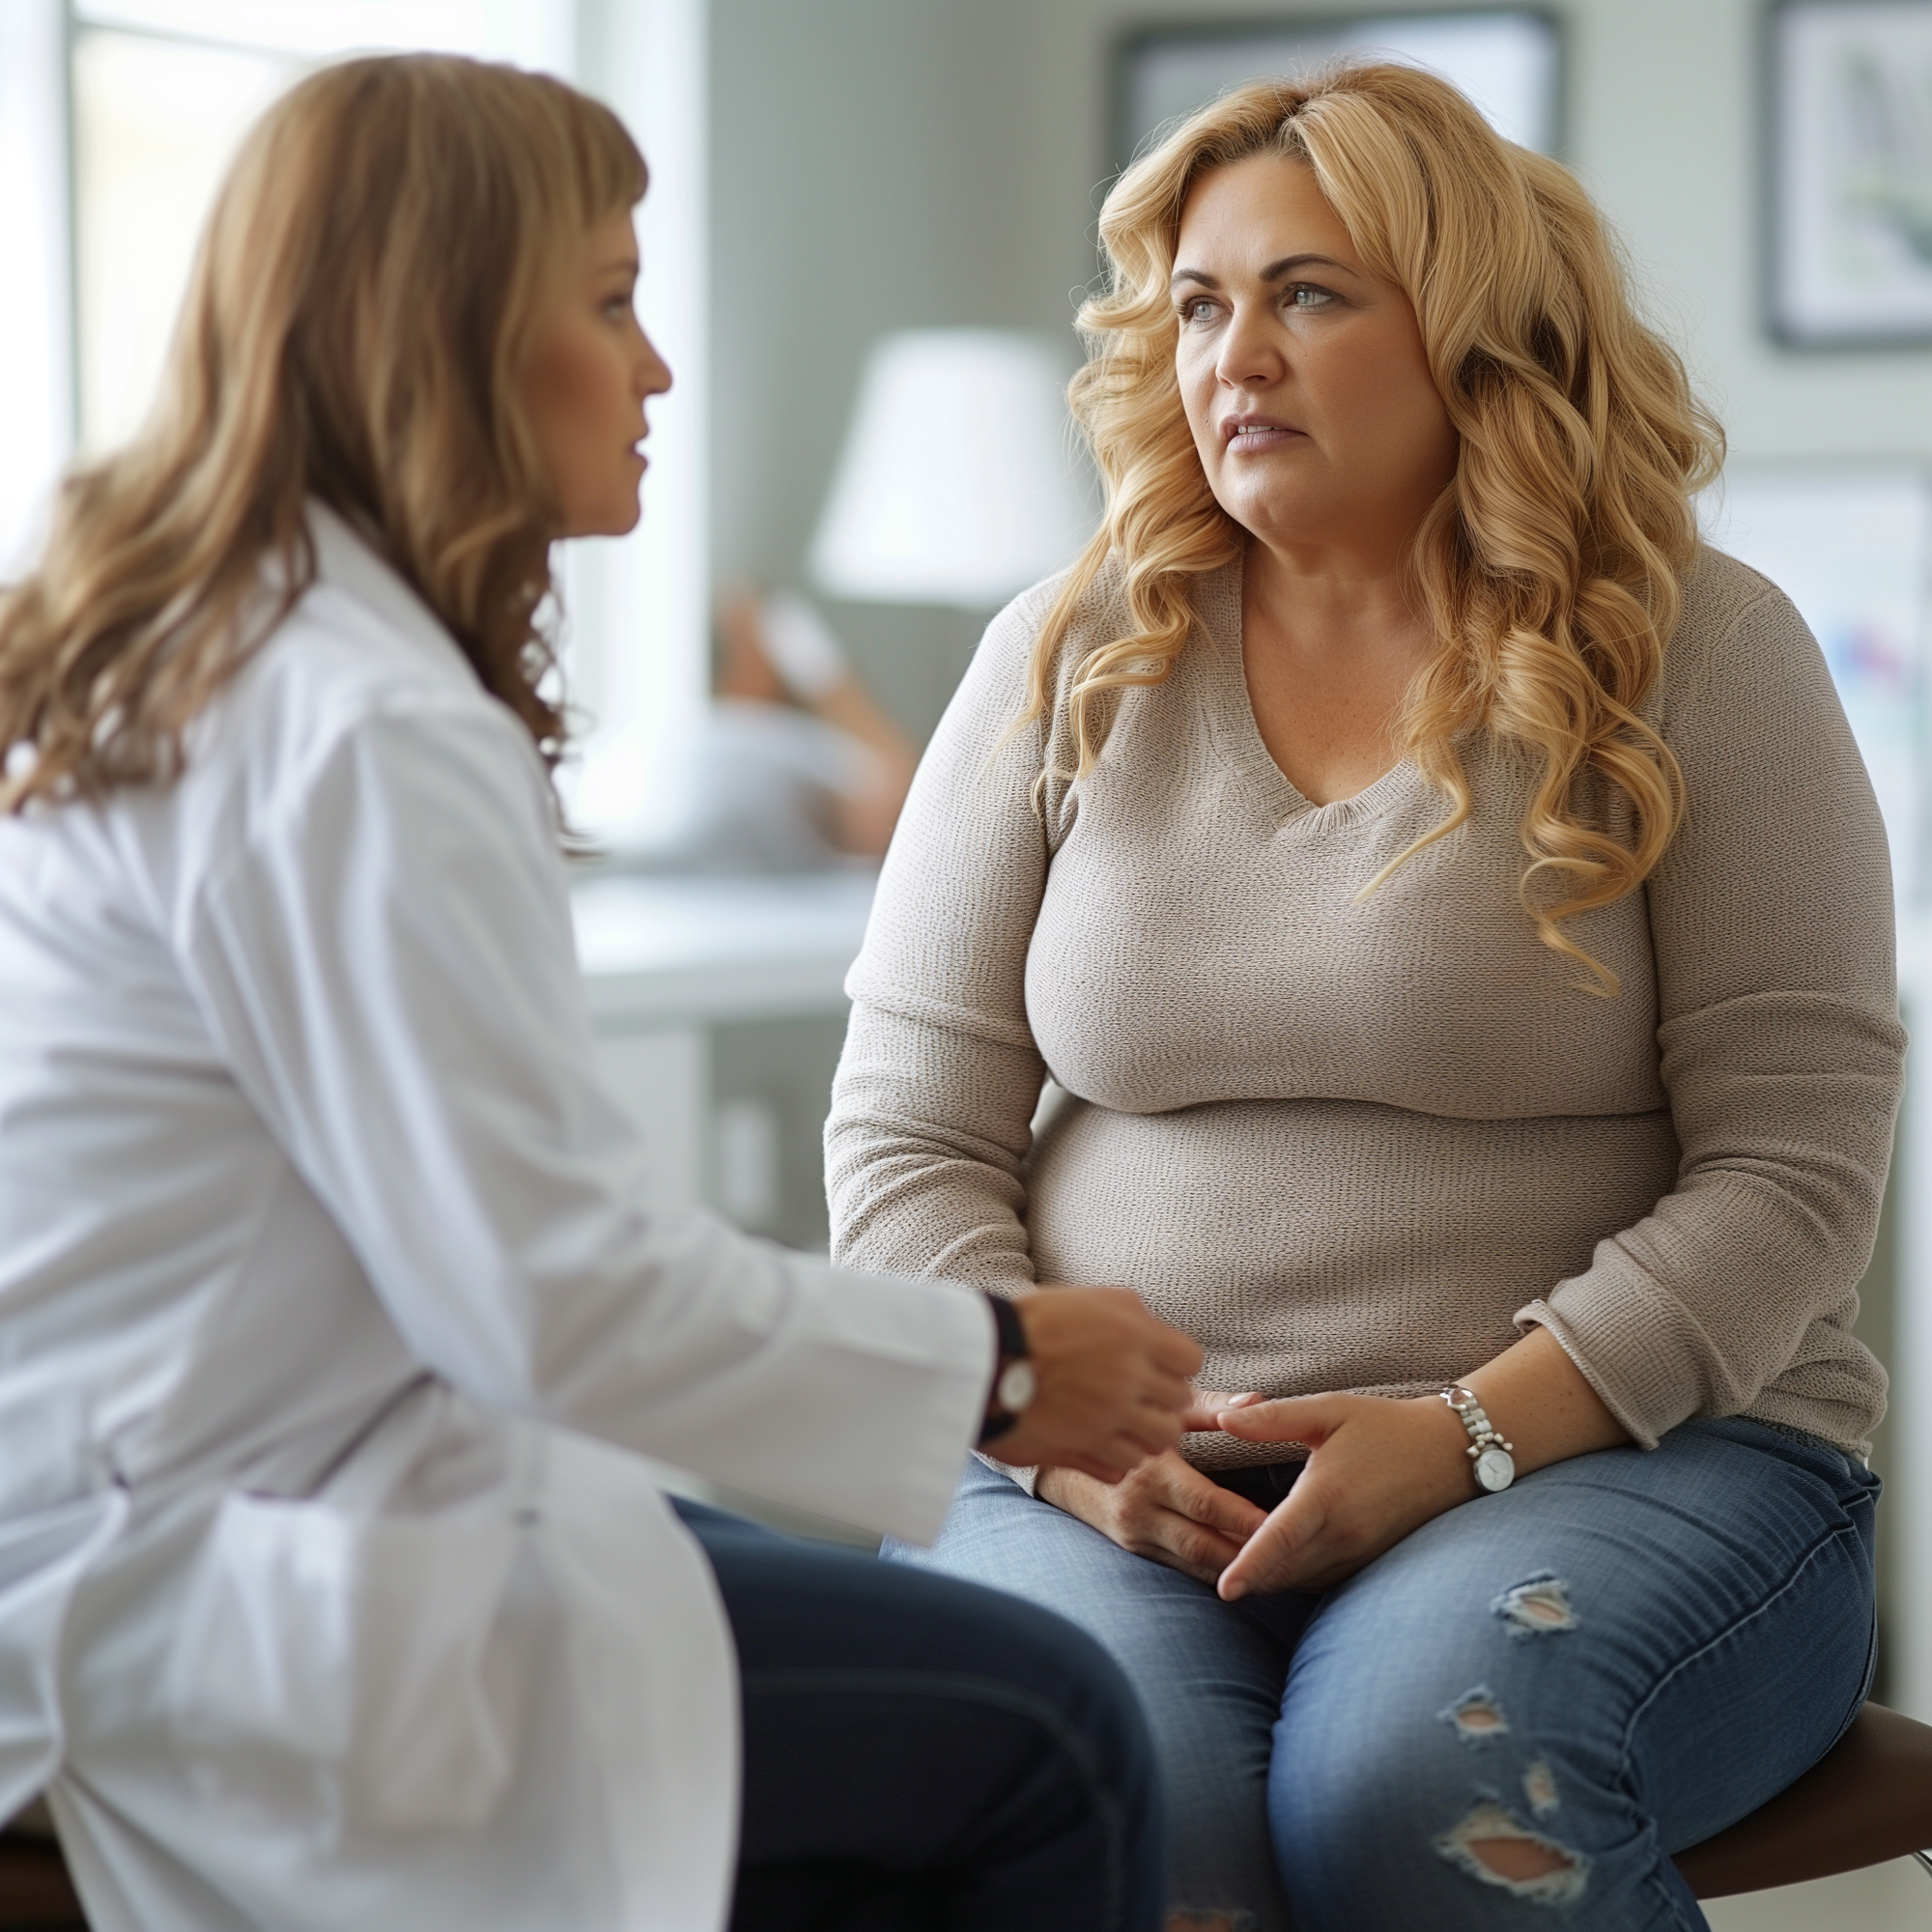 An image of a morbidly obese woman consulting with her doctor.